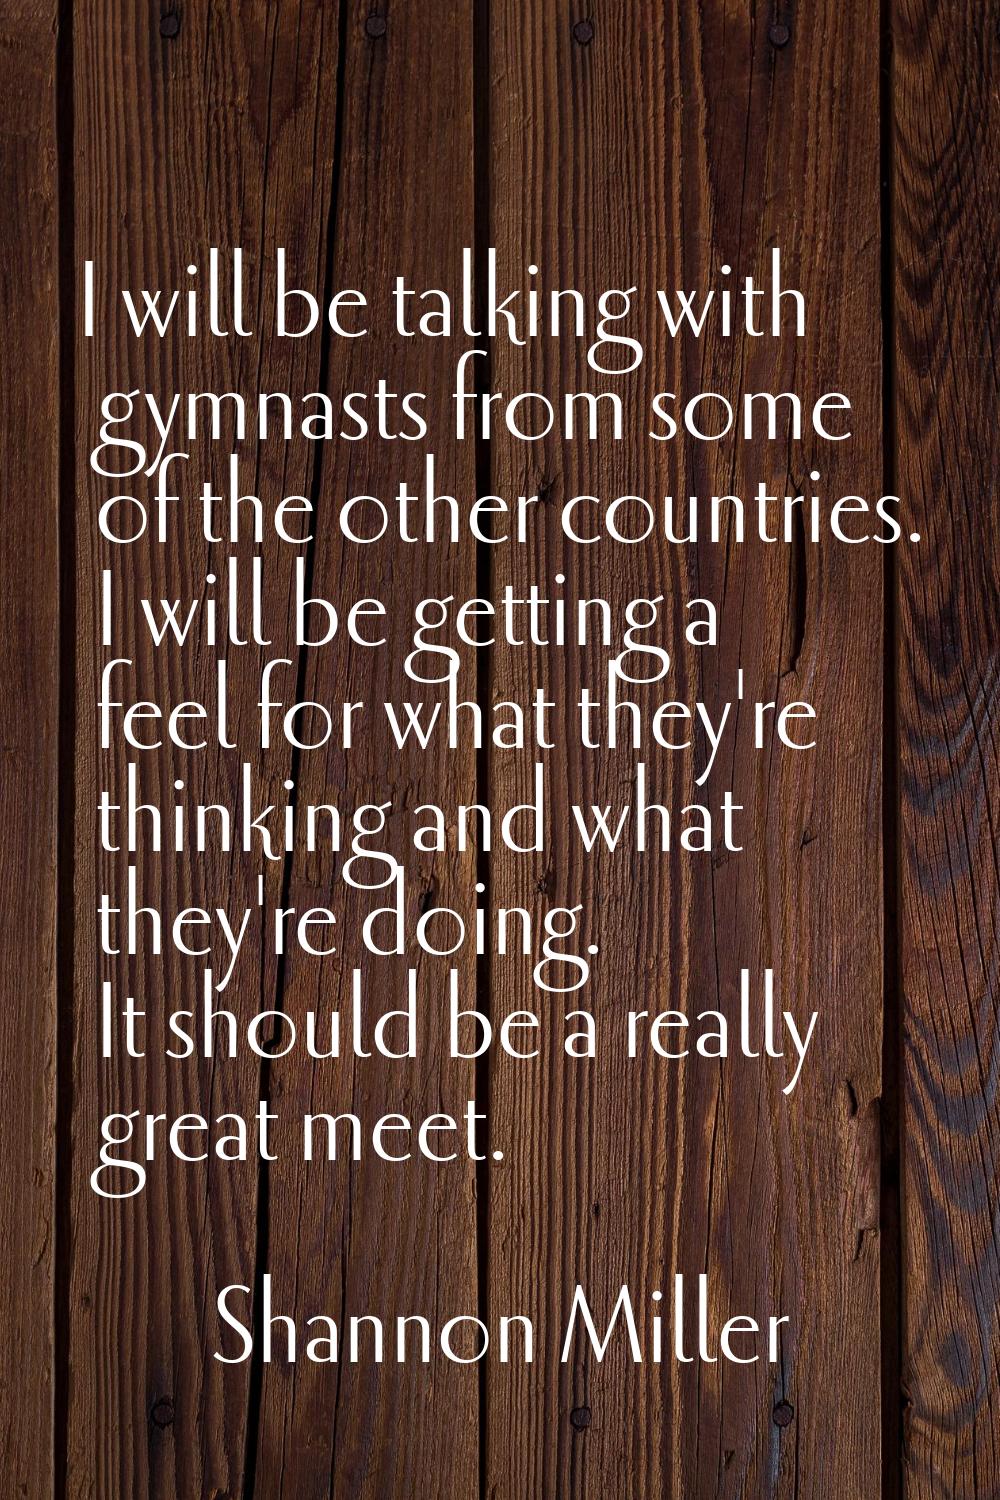 I will be talking with gymnasts from some of the other countries. I will be getting a feel for what